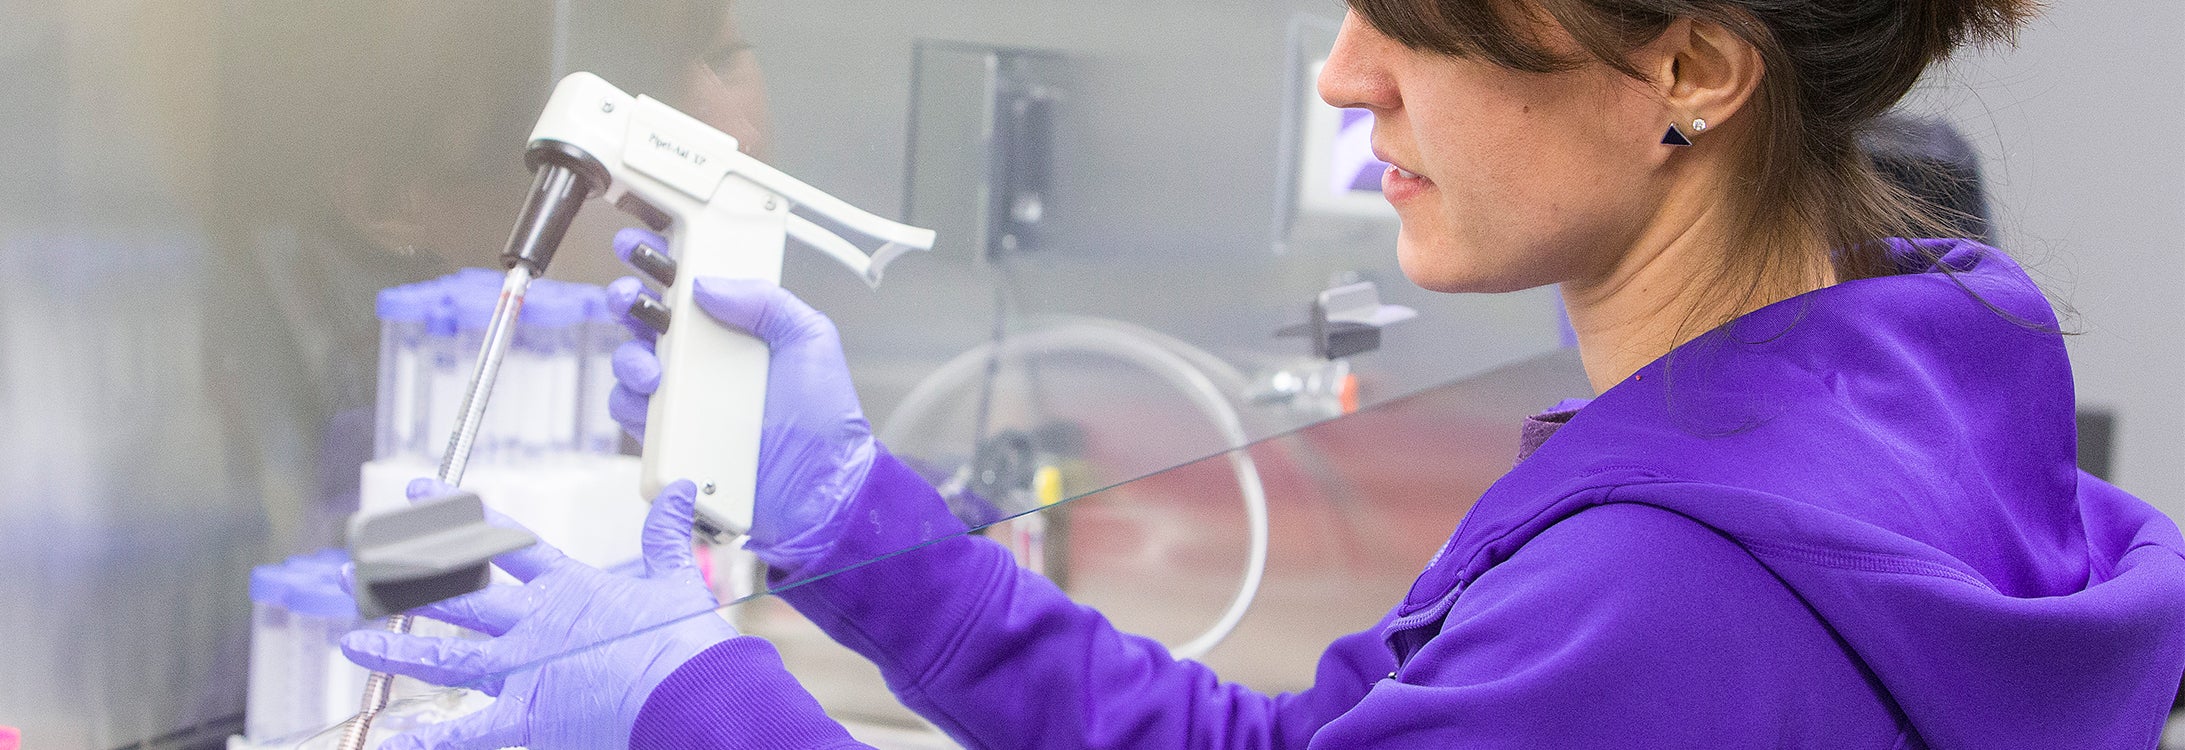 A picture of a person in a purple hoodie holding a piece of lab equipment.